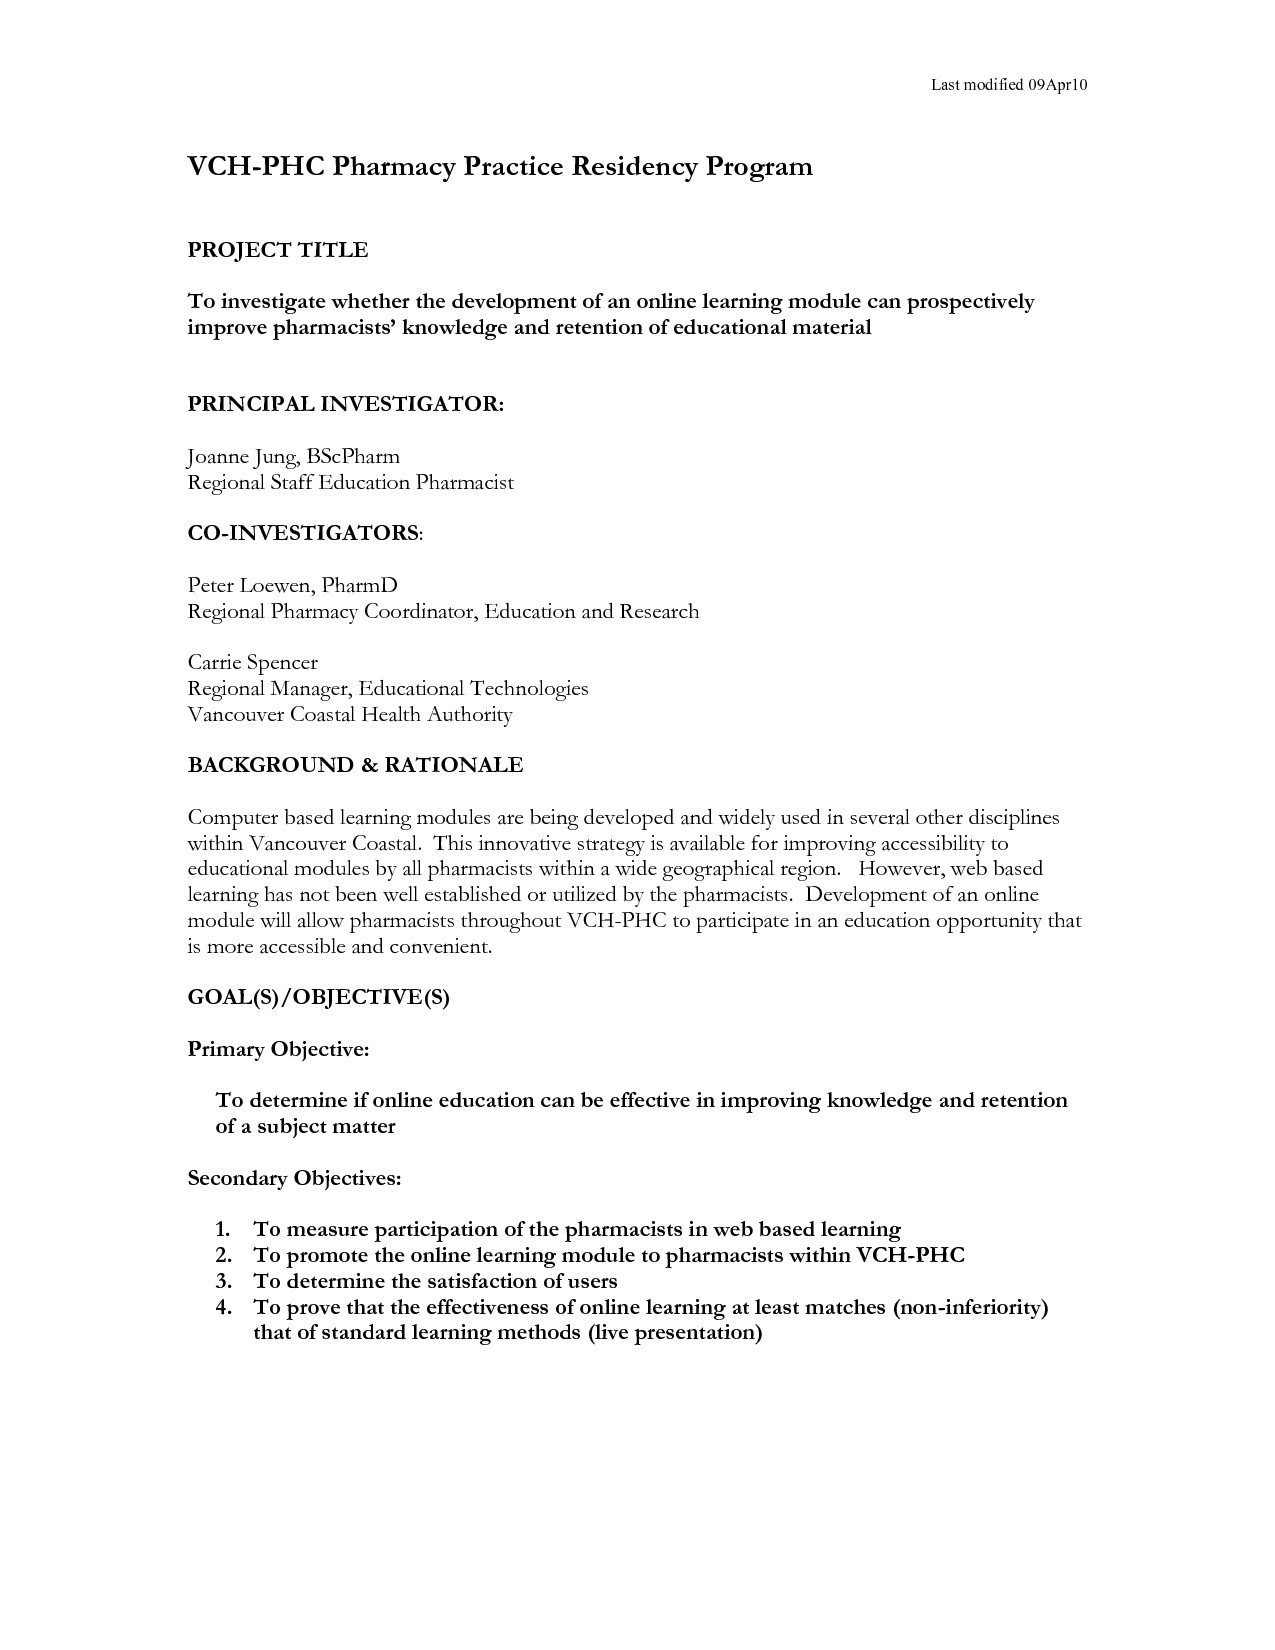 One Page Proposal Template Research Proposal How to Write One